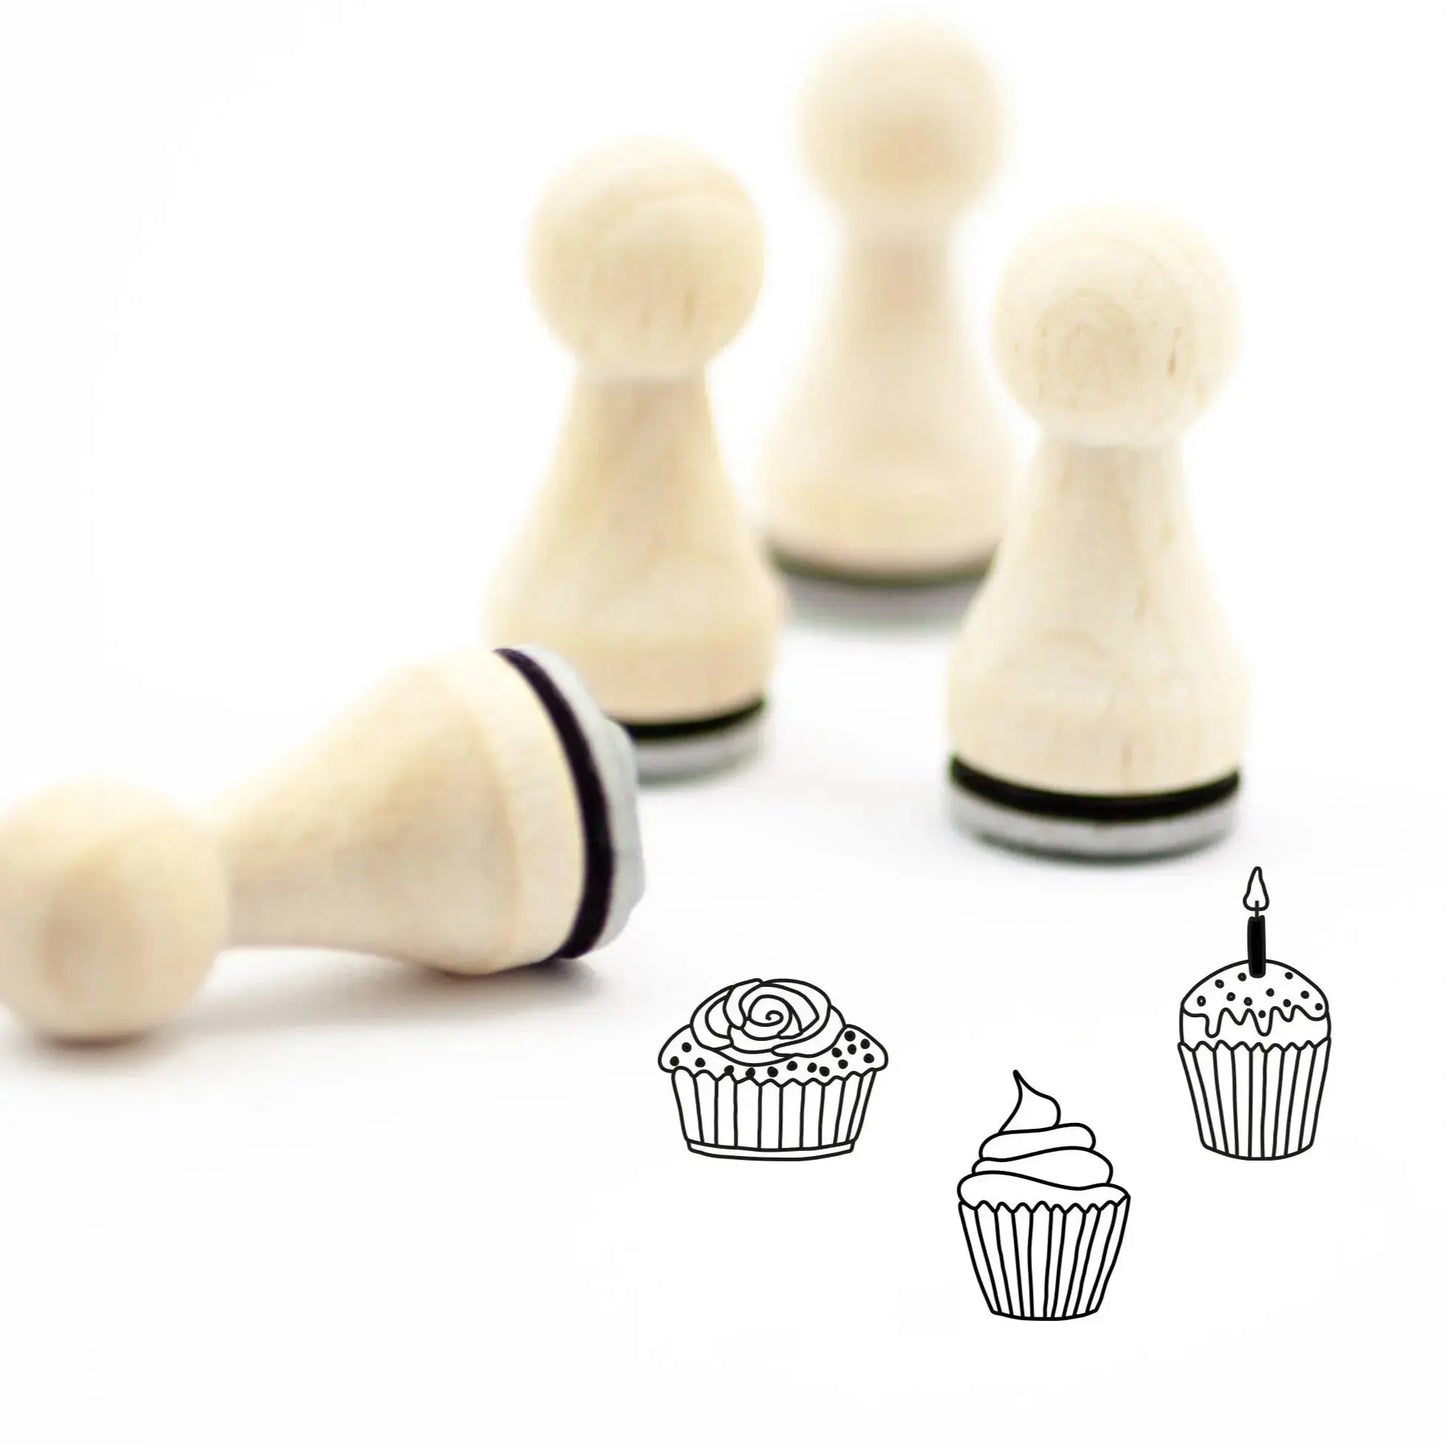 Ministempel-Set "Cupcake" - IN LOVE WITH PAPER